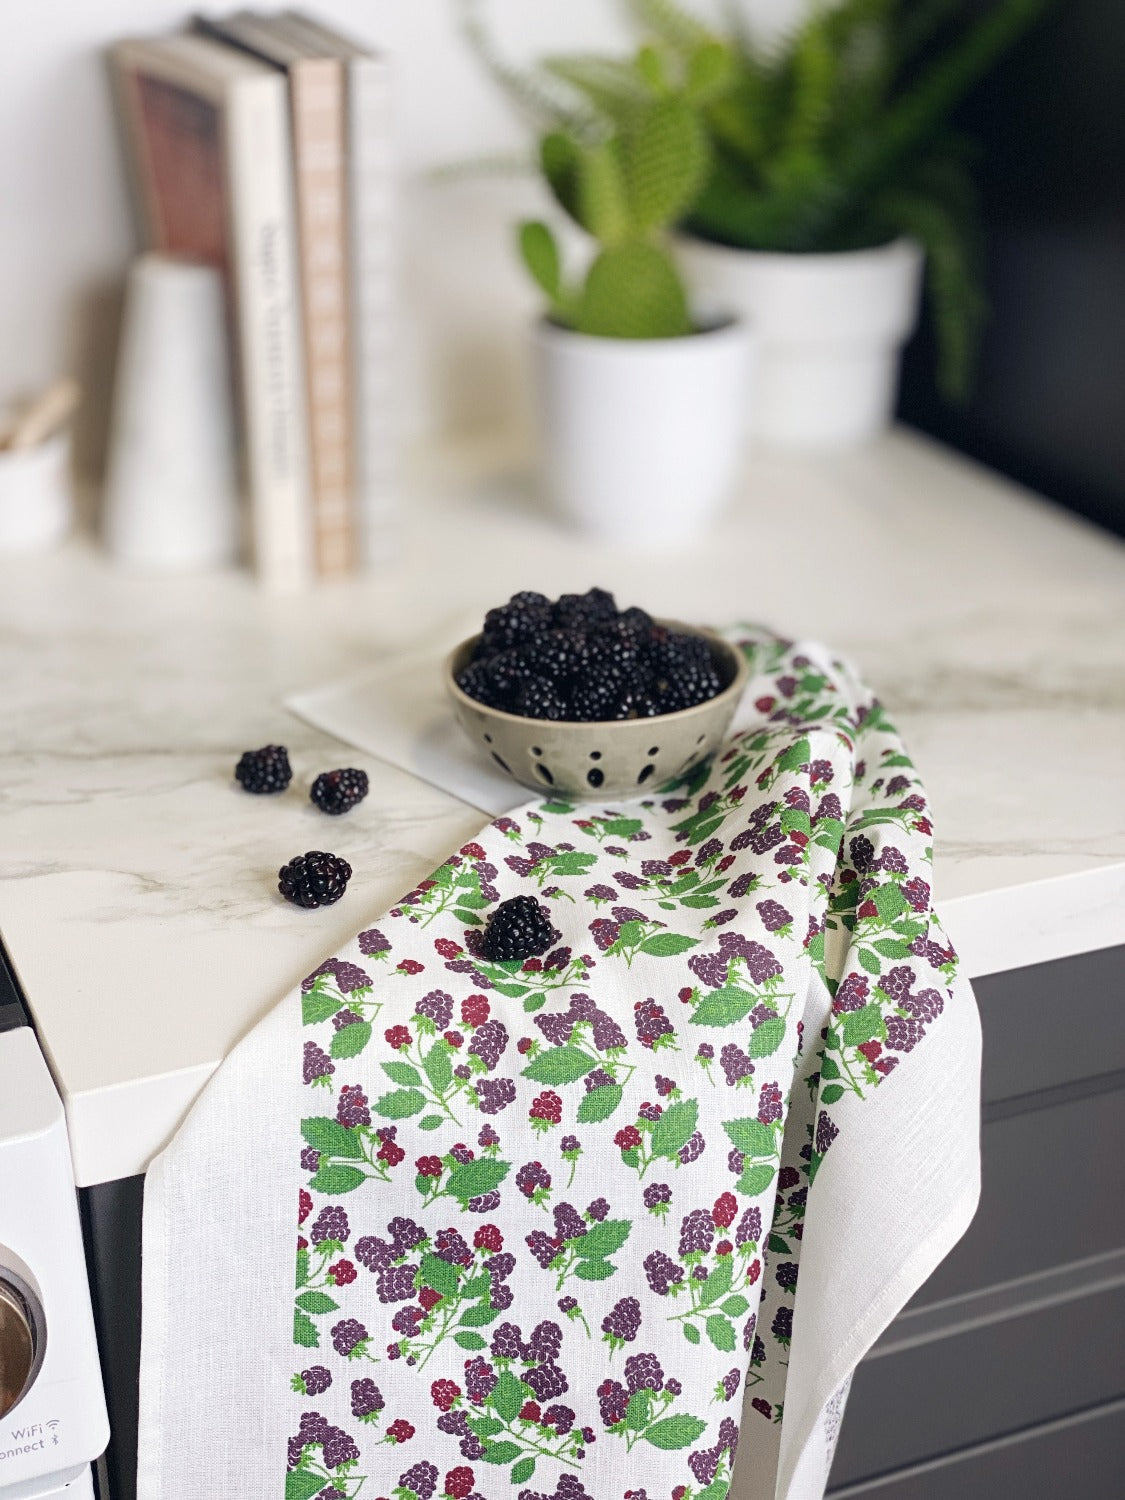 Product image of Vintage Blackberry gift set. In this image there is a white marble countertop with grey cabinets underneath. Against the back, out of focus, are 3 books held up with book ends and two small green plants in white pots. There is a vintage blackberry tea towel with a small bowl full of blackberries on it. There are a few blackberries sprinkled on the counter as well. You can see a little bit of a stove on the left side. 